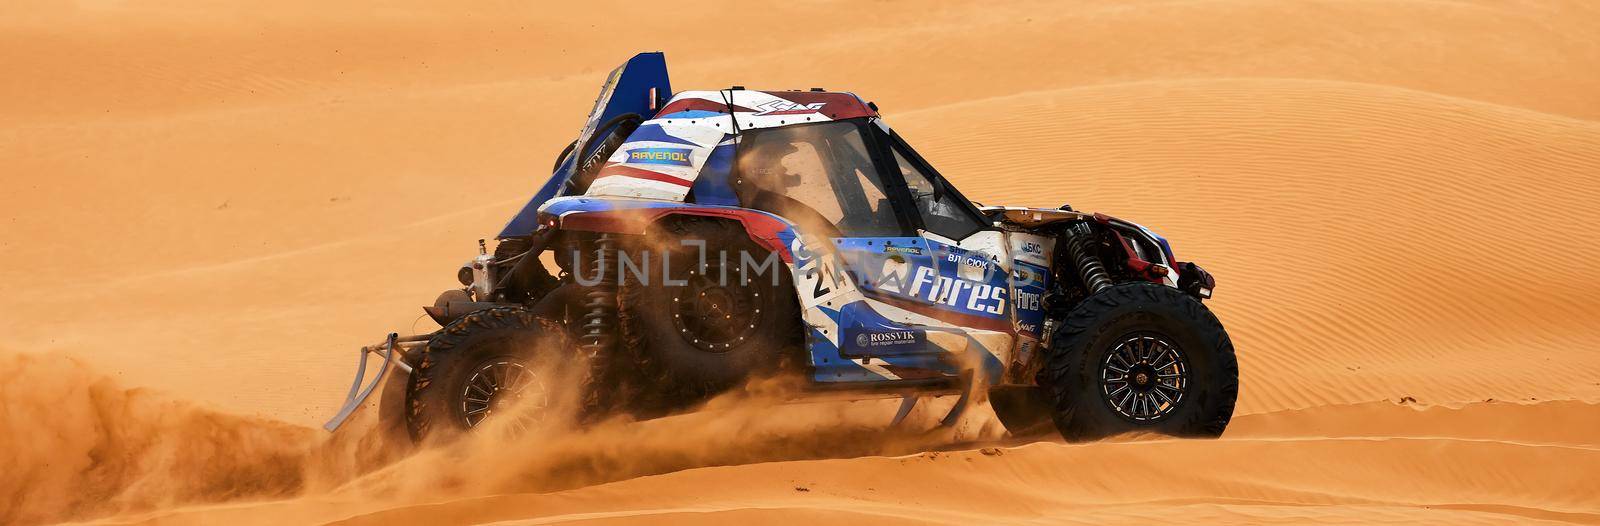 Sports car gets over the difficult part of the route during the Rally raid THE GOLD OF KAGAN-2021. 26.04.2021 Astrakhan, Russia by EvgeniyQW